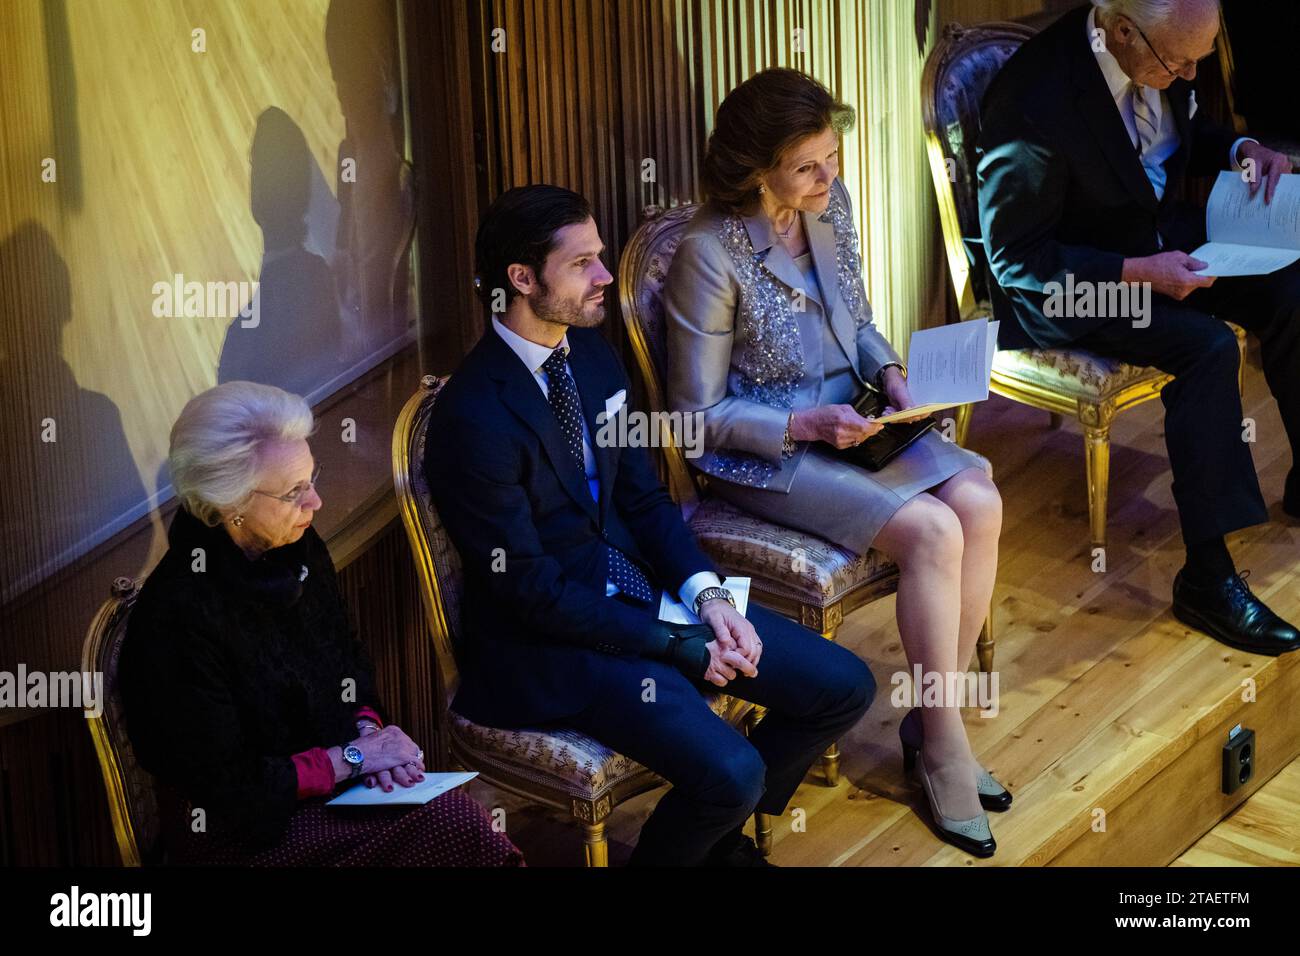 Princess Benedikte of Denmark, Prince Carl Philip, Queen Silvia, King Carl Gustaf, attend a concert at Lilla Akademien on the occasion of the Queen's 80th birthday at Lilla Akademien, Stockholm, Sweden 30 November 2023. Photo: Magnus Lejhall / TT / code 10658 Stock Photo